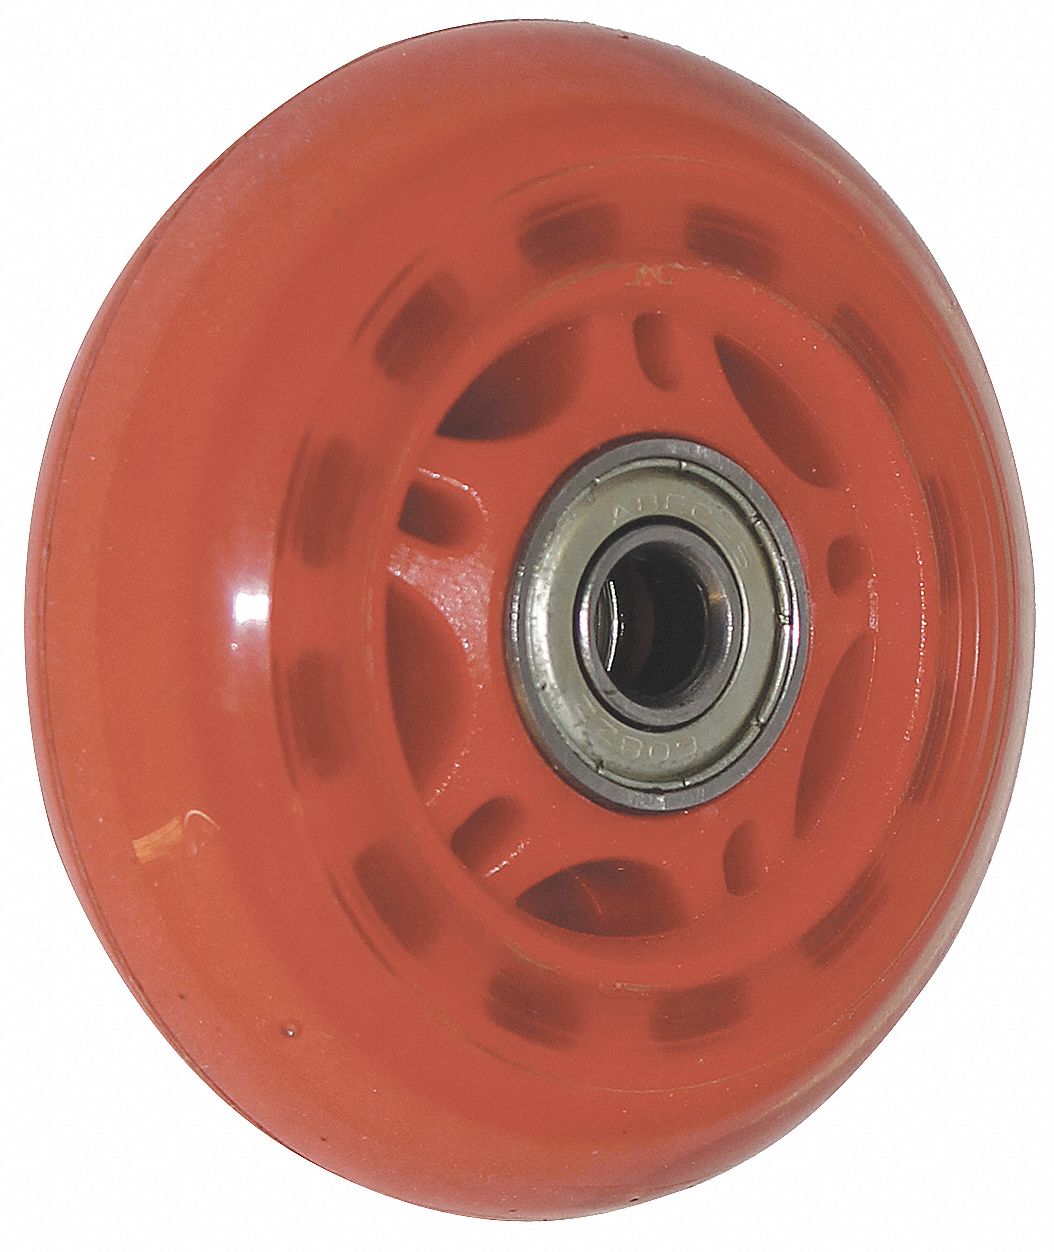 Safety Wheel: For 20YV85/20YV86/20YV87, For PET-R/PET-RL/PET-RLX, Fits MYGOPET Brand